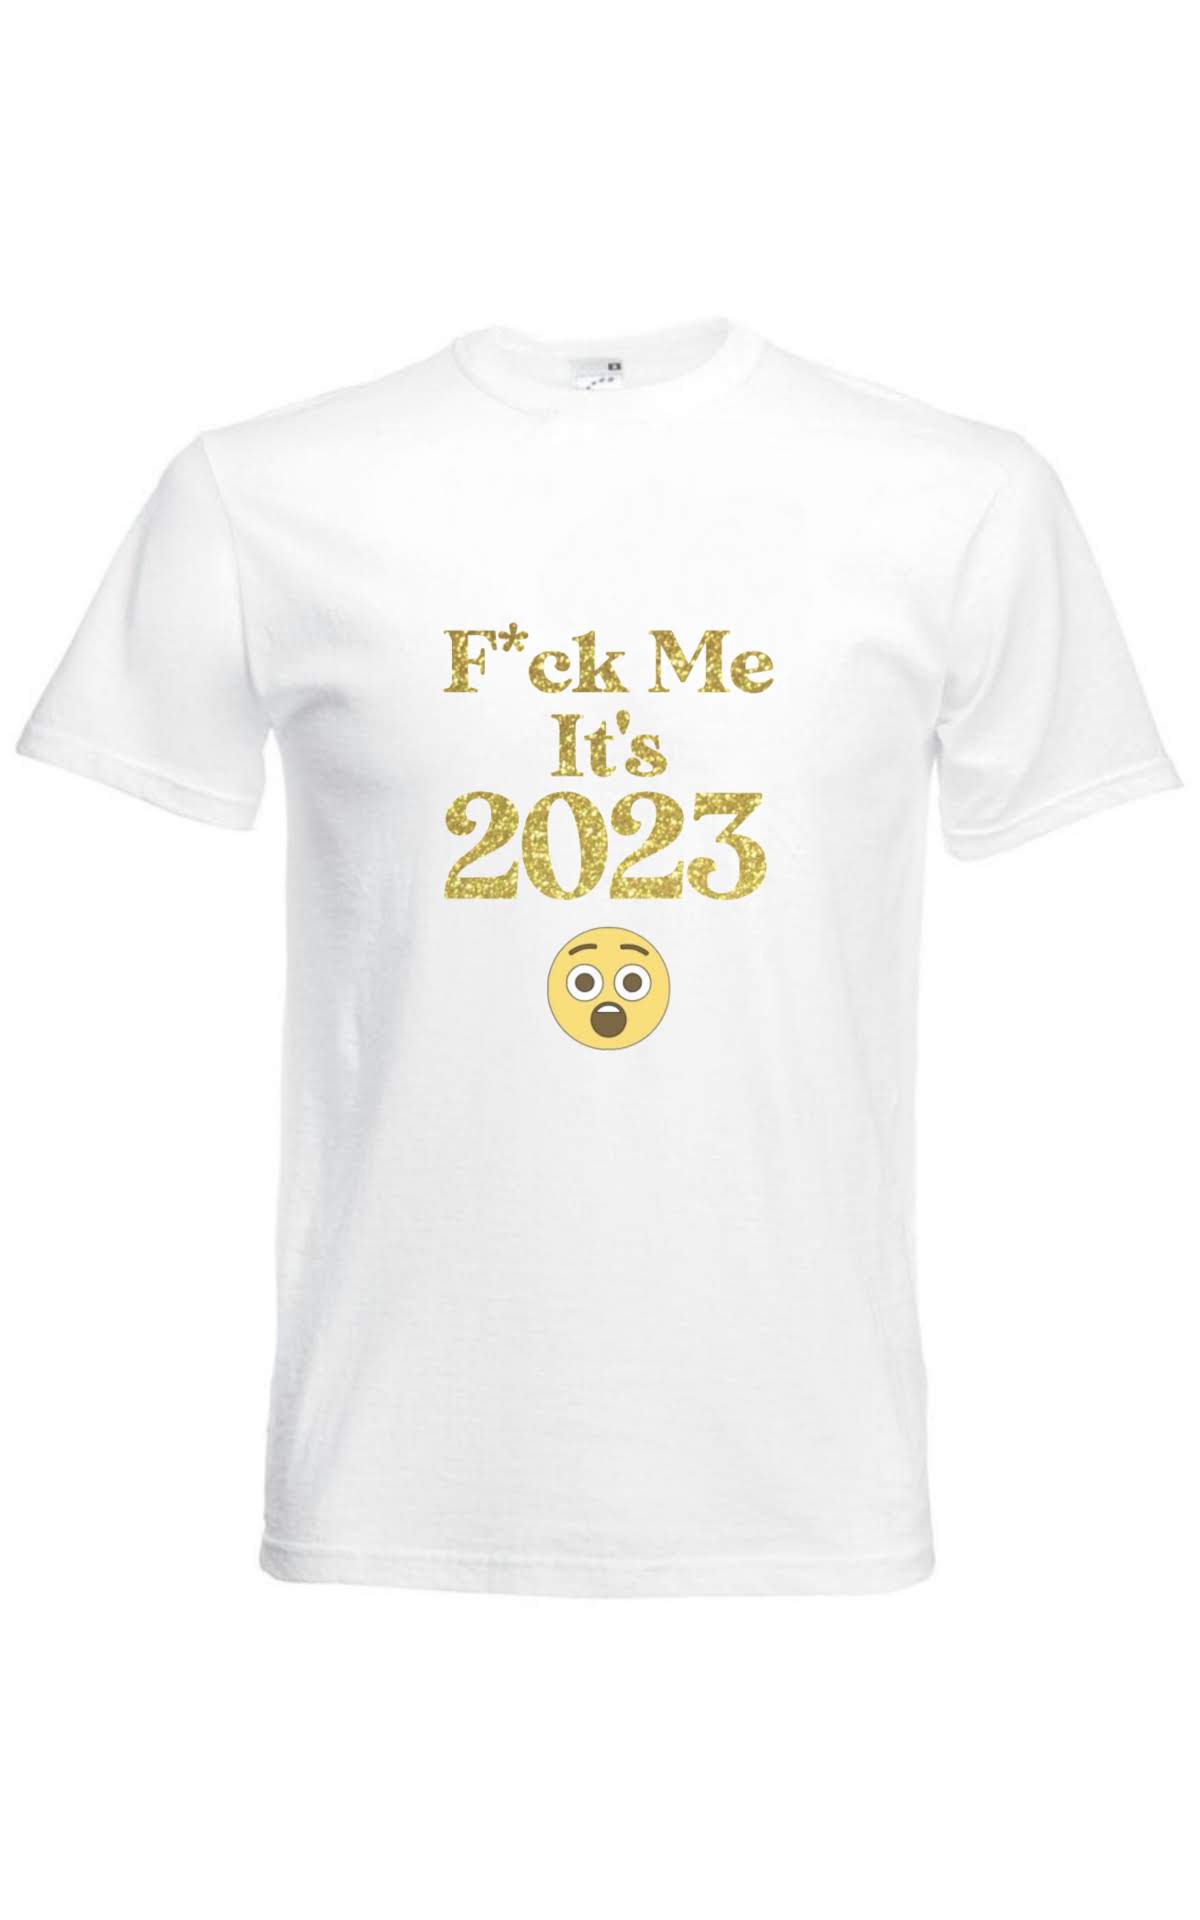 F*CK ME IT's 2023 T-shirt - Limited Edition!